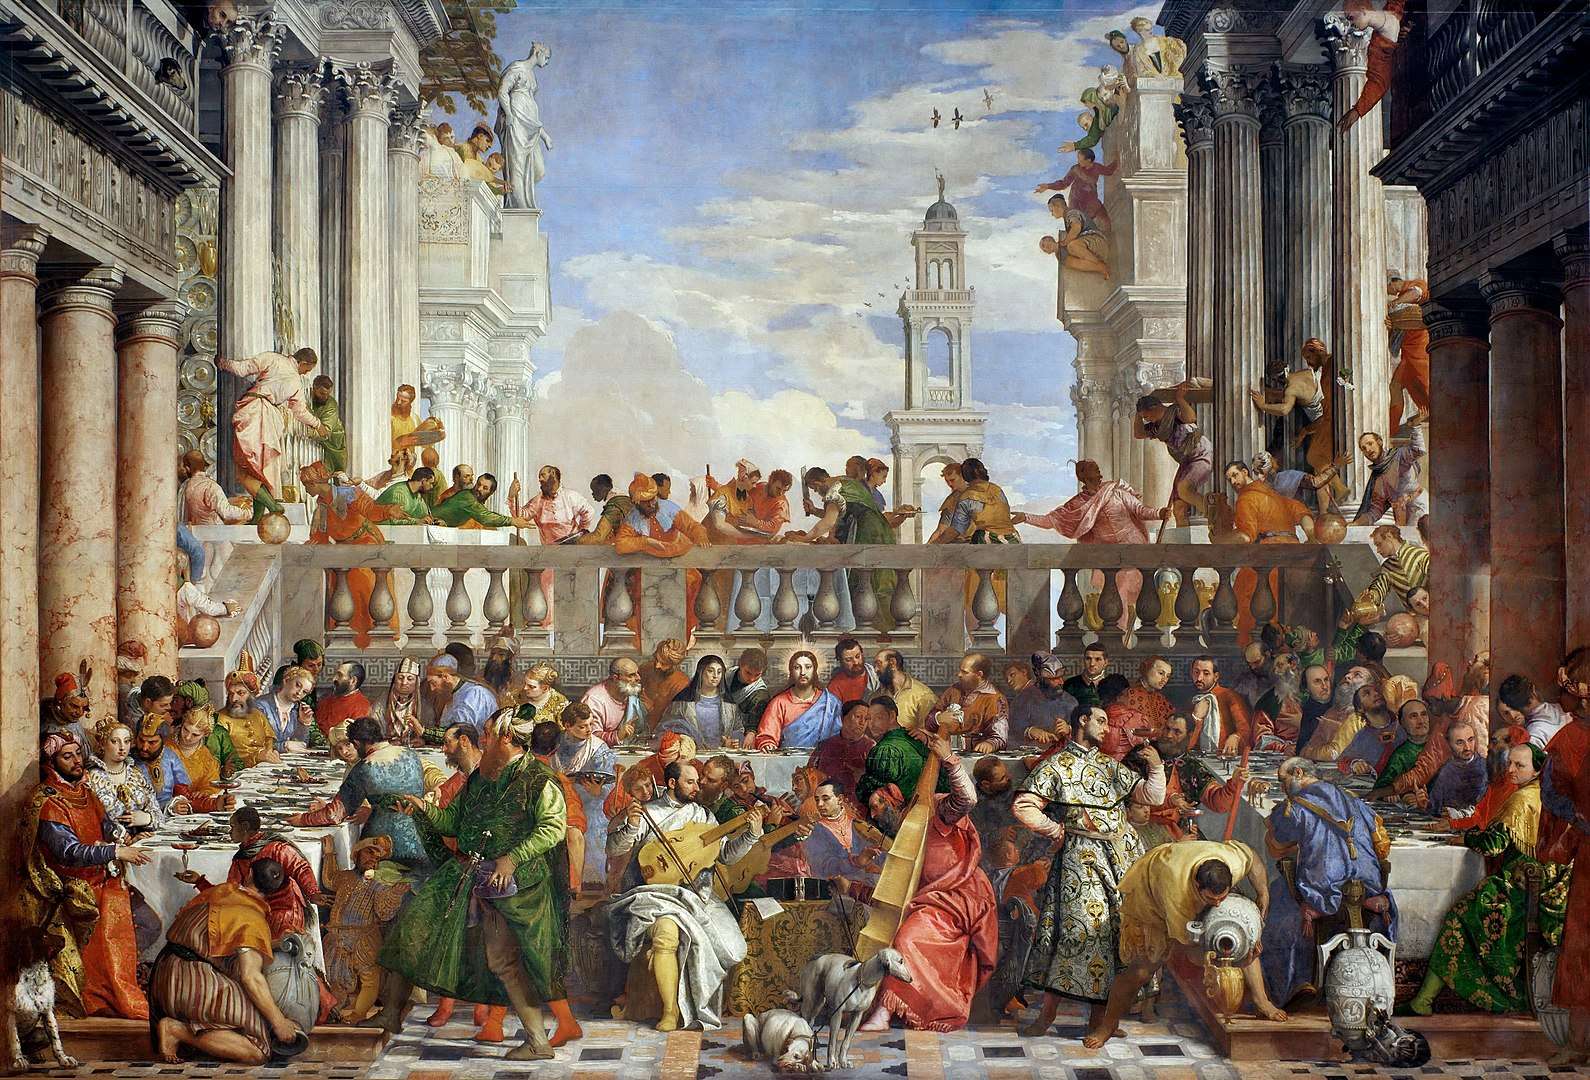 Christian Unity, The Wedding at Cana Louvre Museum by PARIS BY EMY